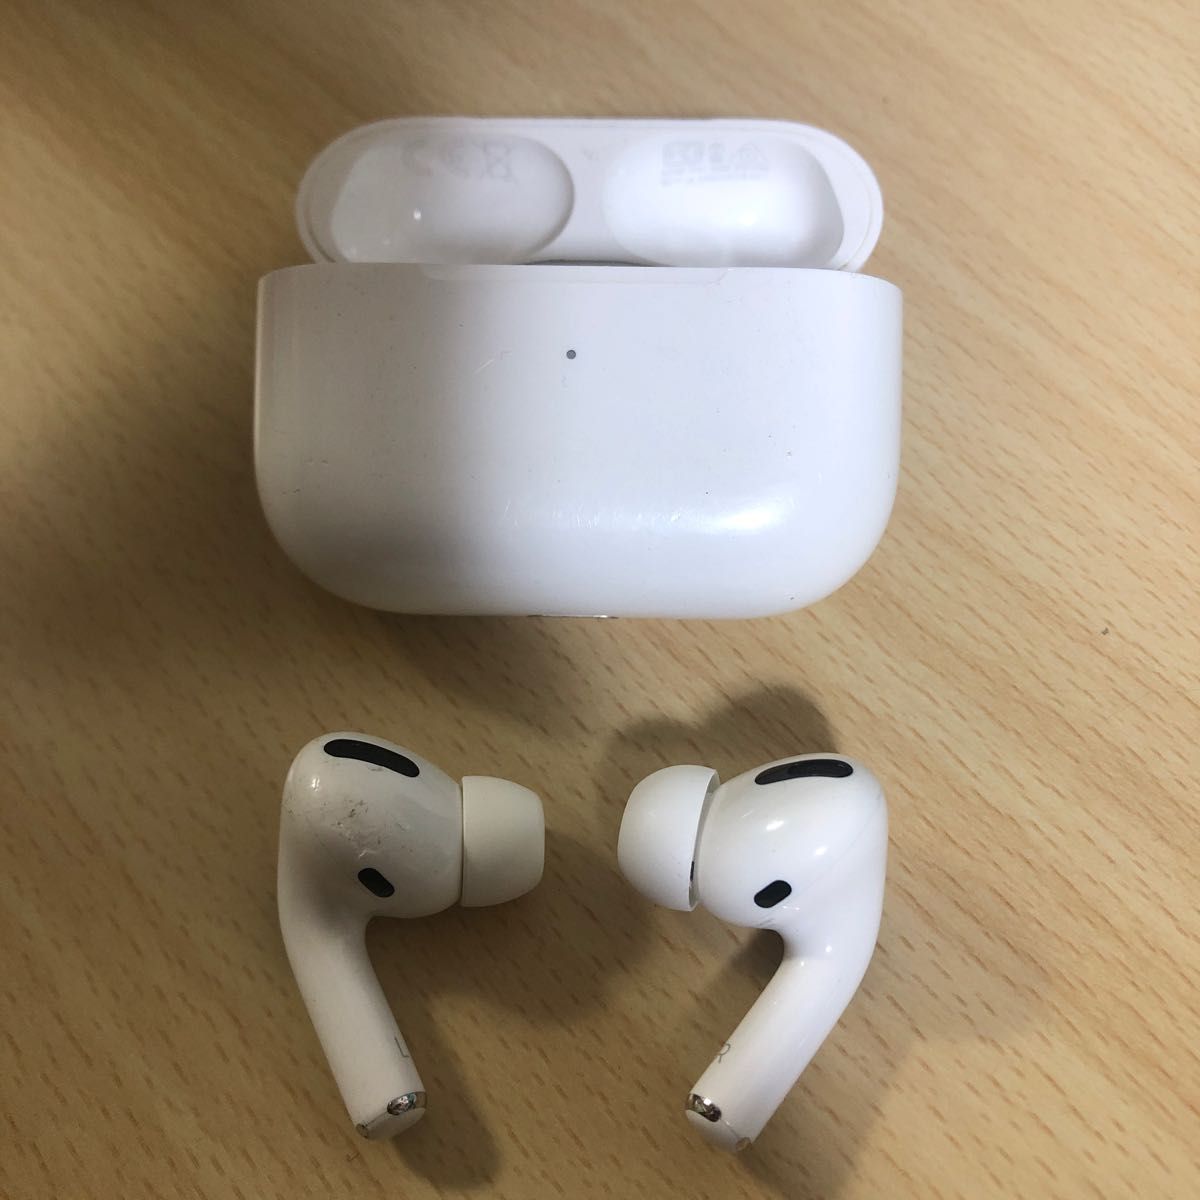 Apple Airpods Pro 第1世代 第一世代 A2190 A2083 A2084 正規品 MWP22J/A 100722｜PayPayフリマ